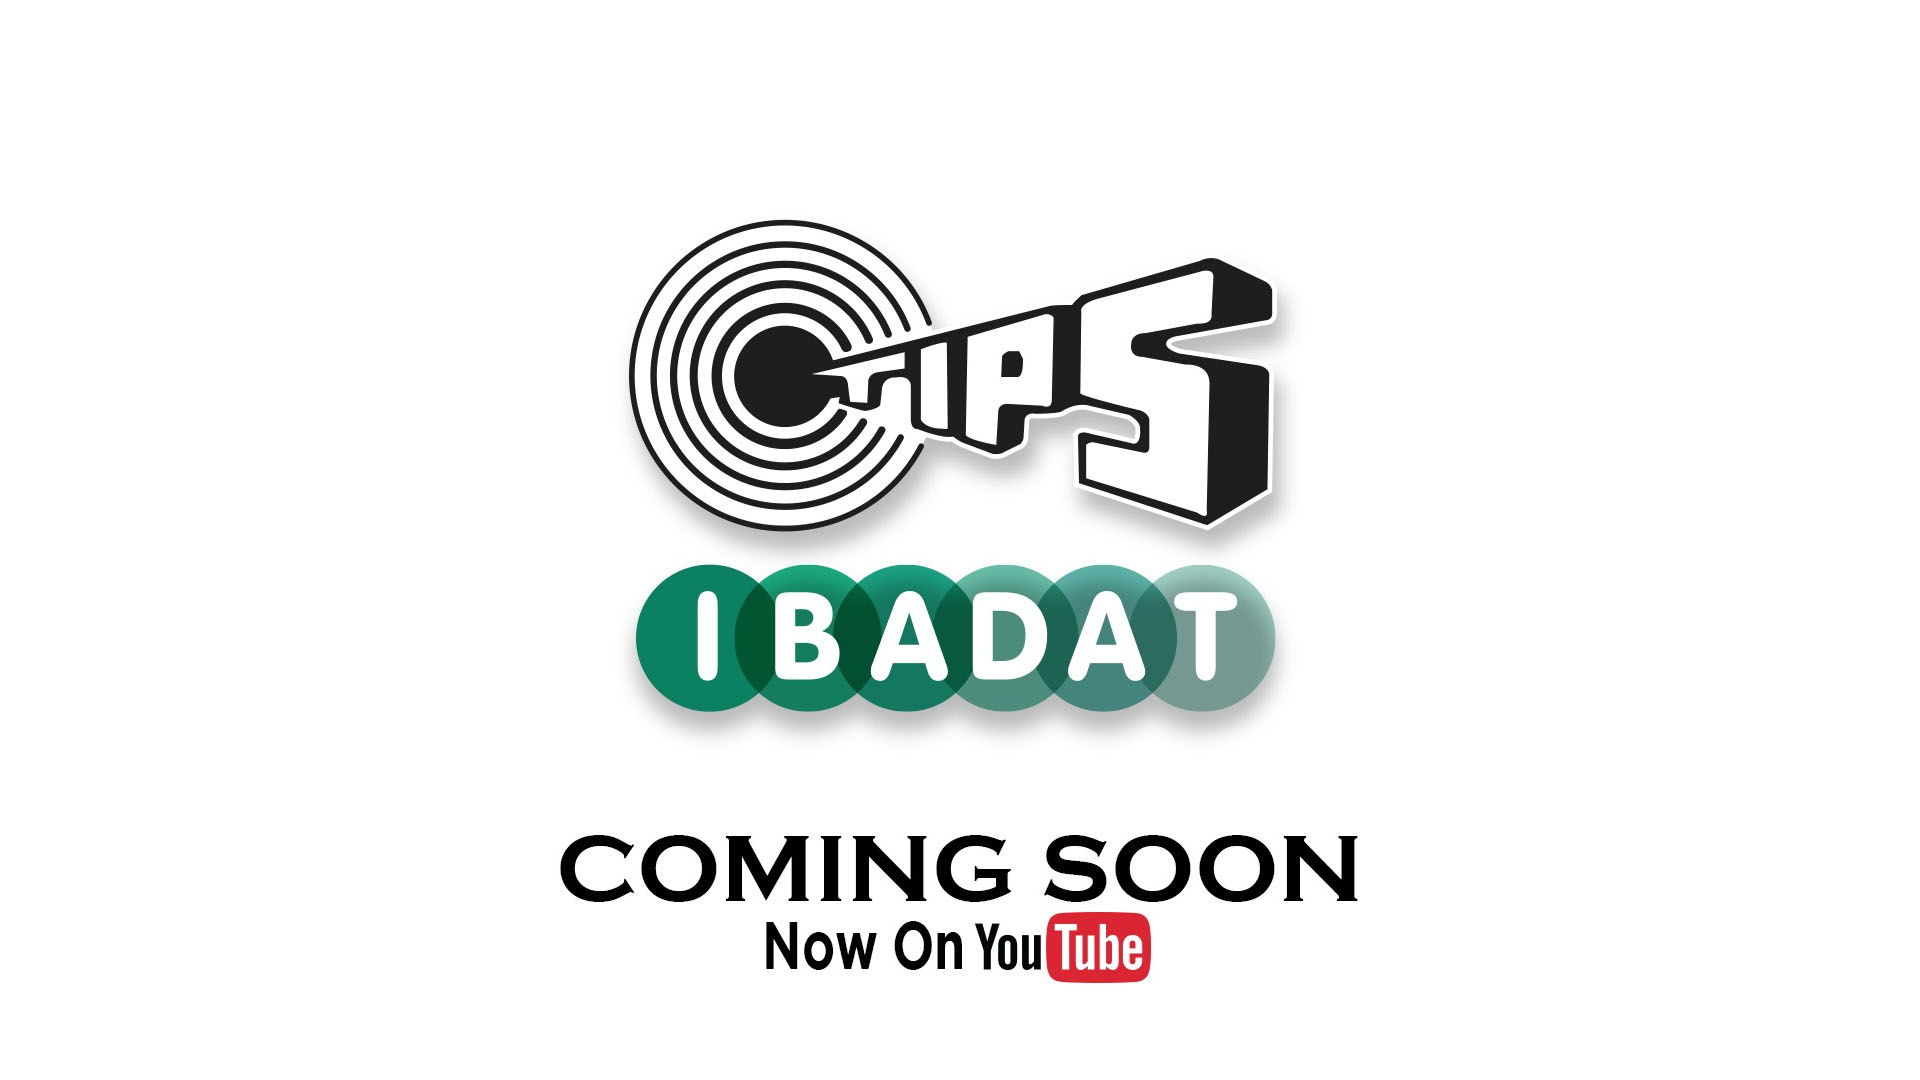 As the New Year commences, Tips Industries Ltd is excited to launch “Tips Ibadat” with content beautifully made from the heart to soothe the soul and keep you yearning for more.